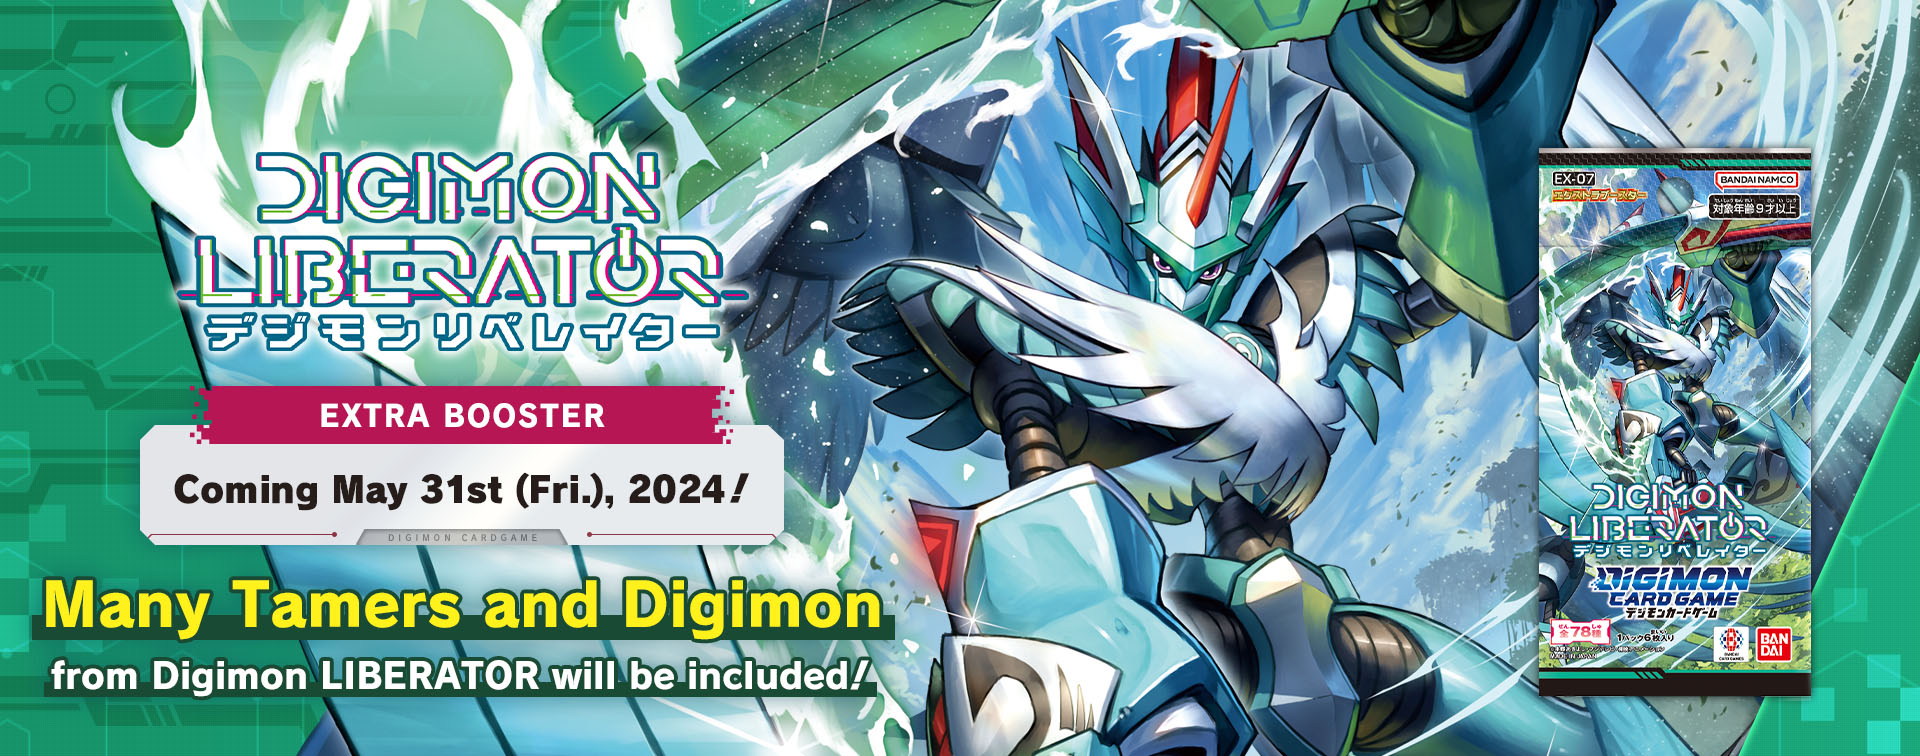 DIGIMON CARD GAME<br>EXTRA BOOSTER DIGIMON LIBERATOR [EX-07]